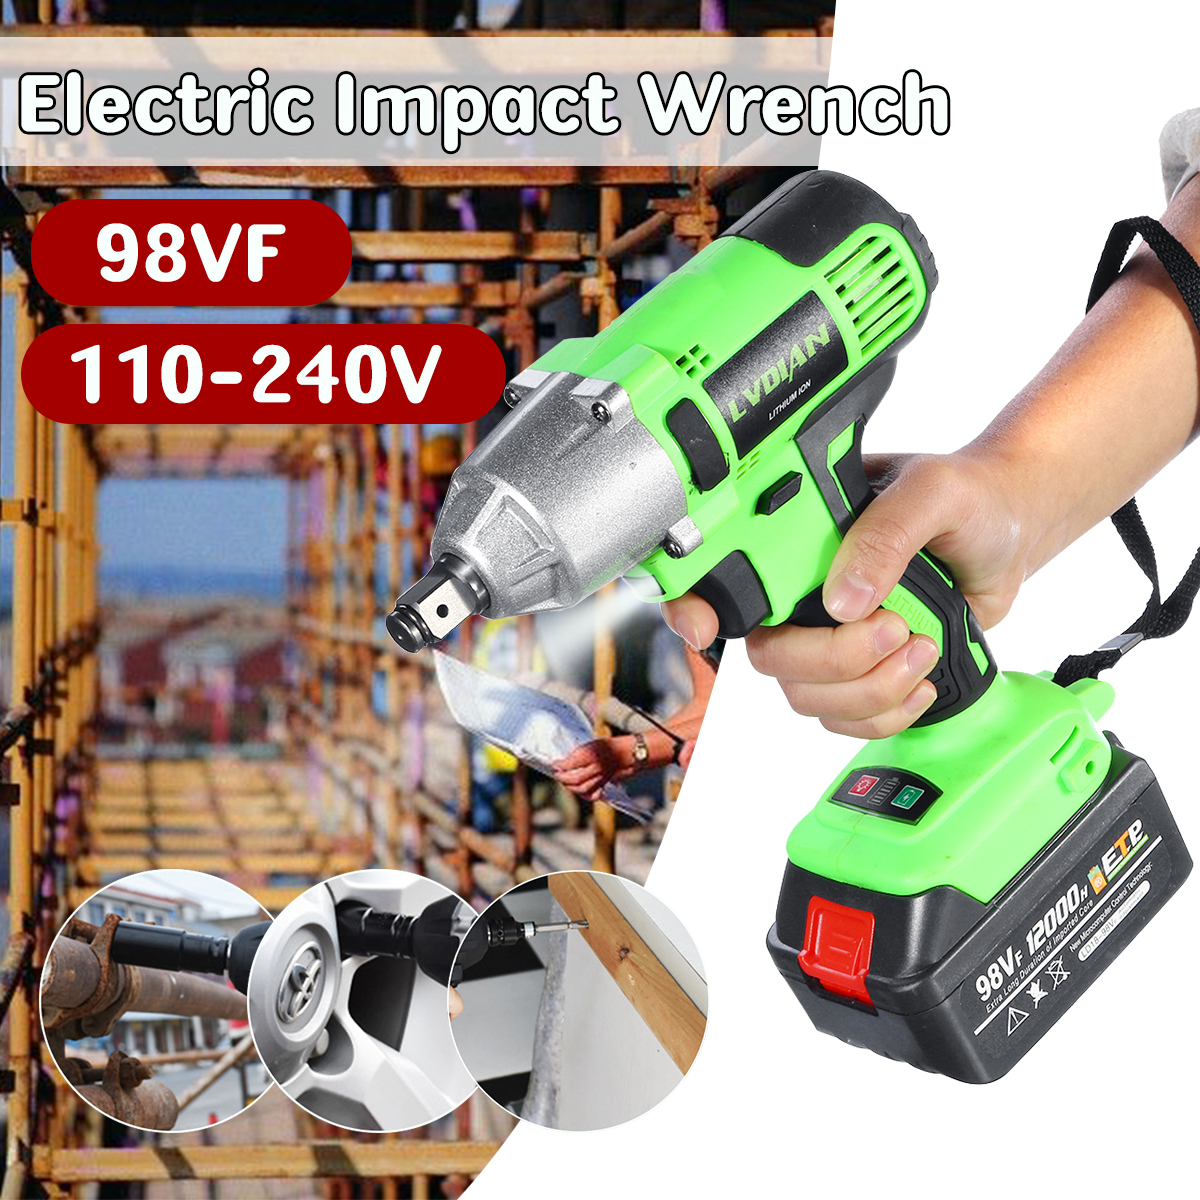 98VF-110-240V-Electric-Wrench-12000mAh-Electric-Power-Wrench-Tool-1409950-1